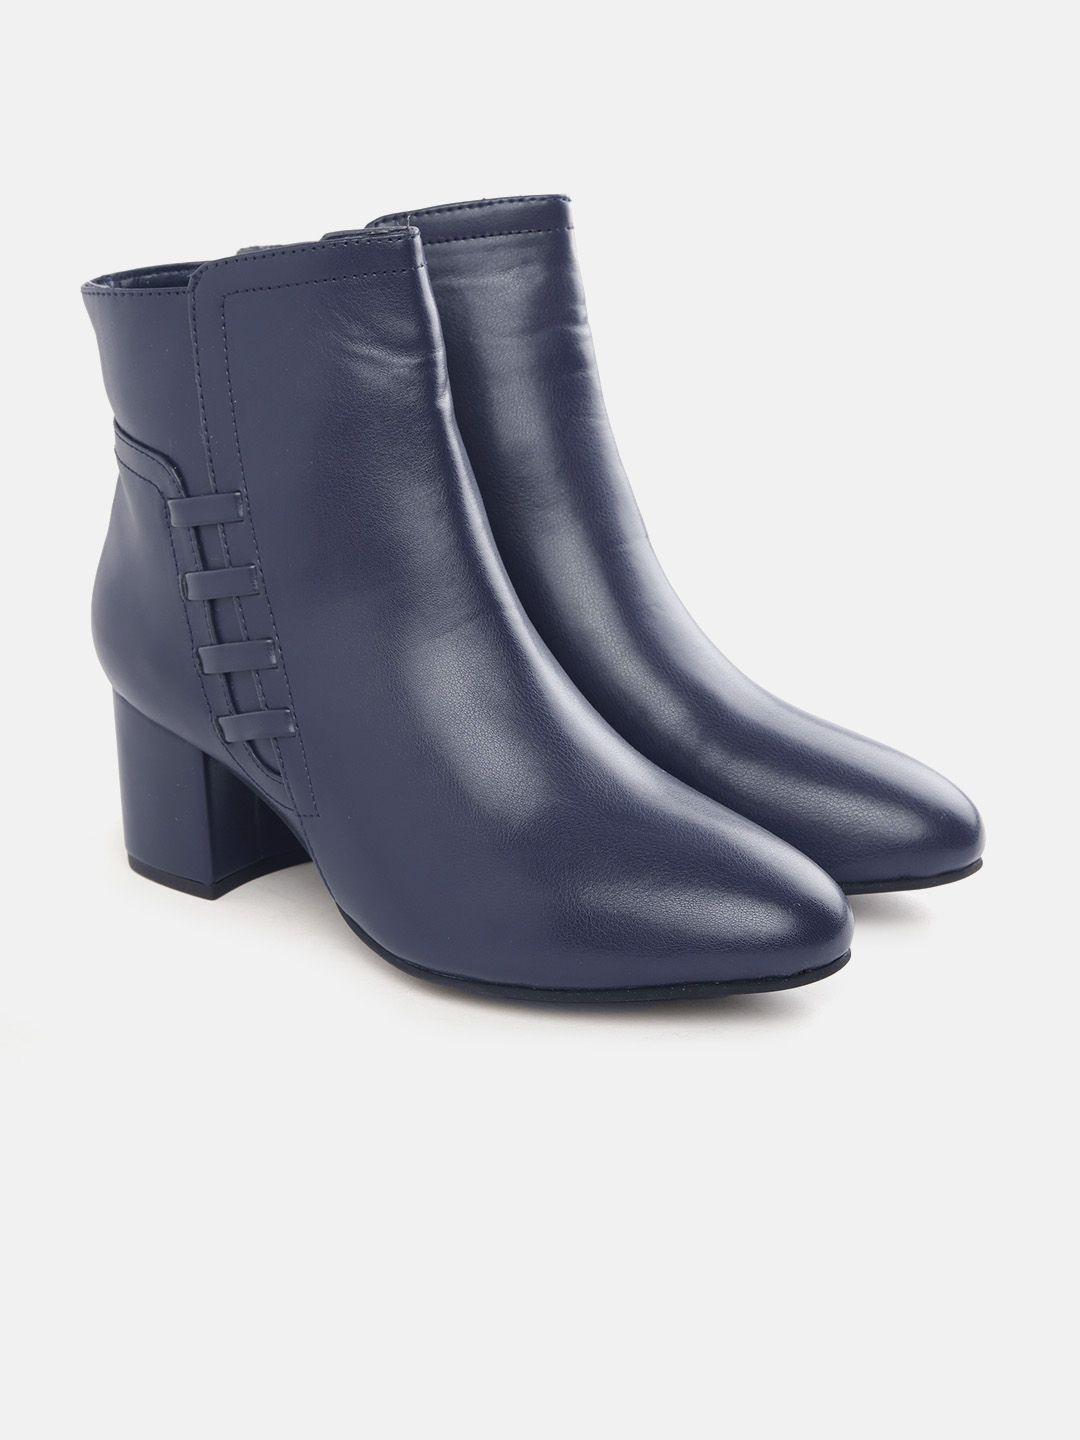 mast & harbour women navy blue solid heeled boots